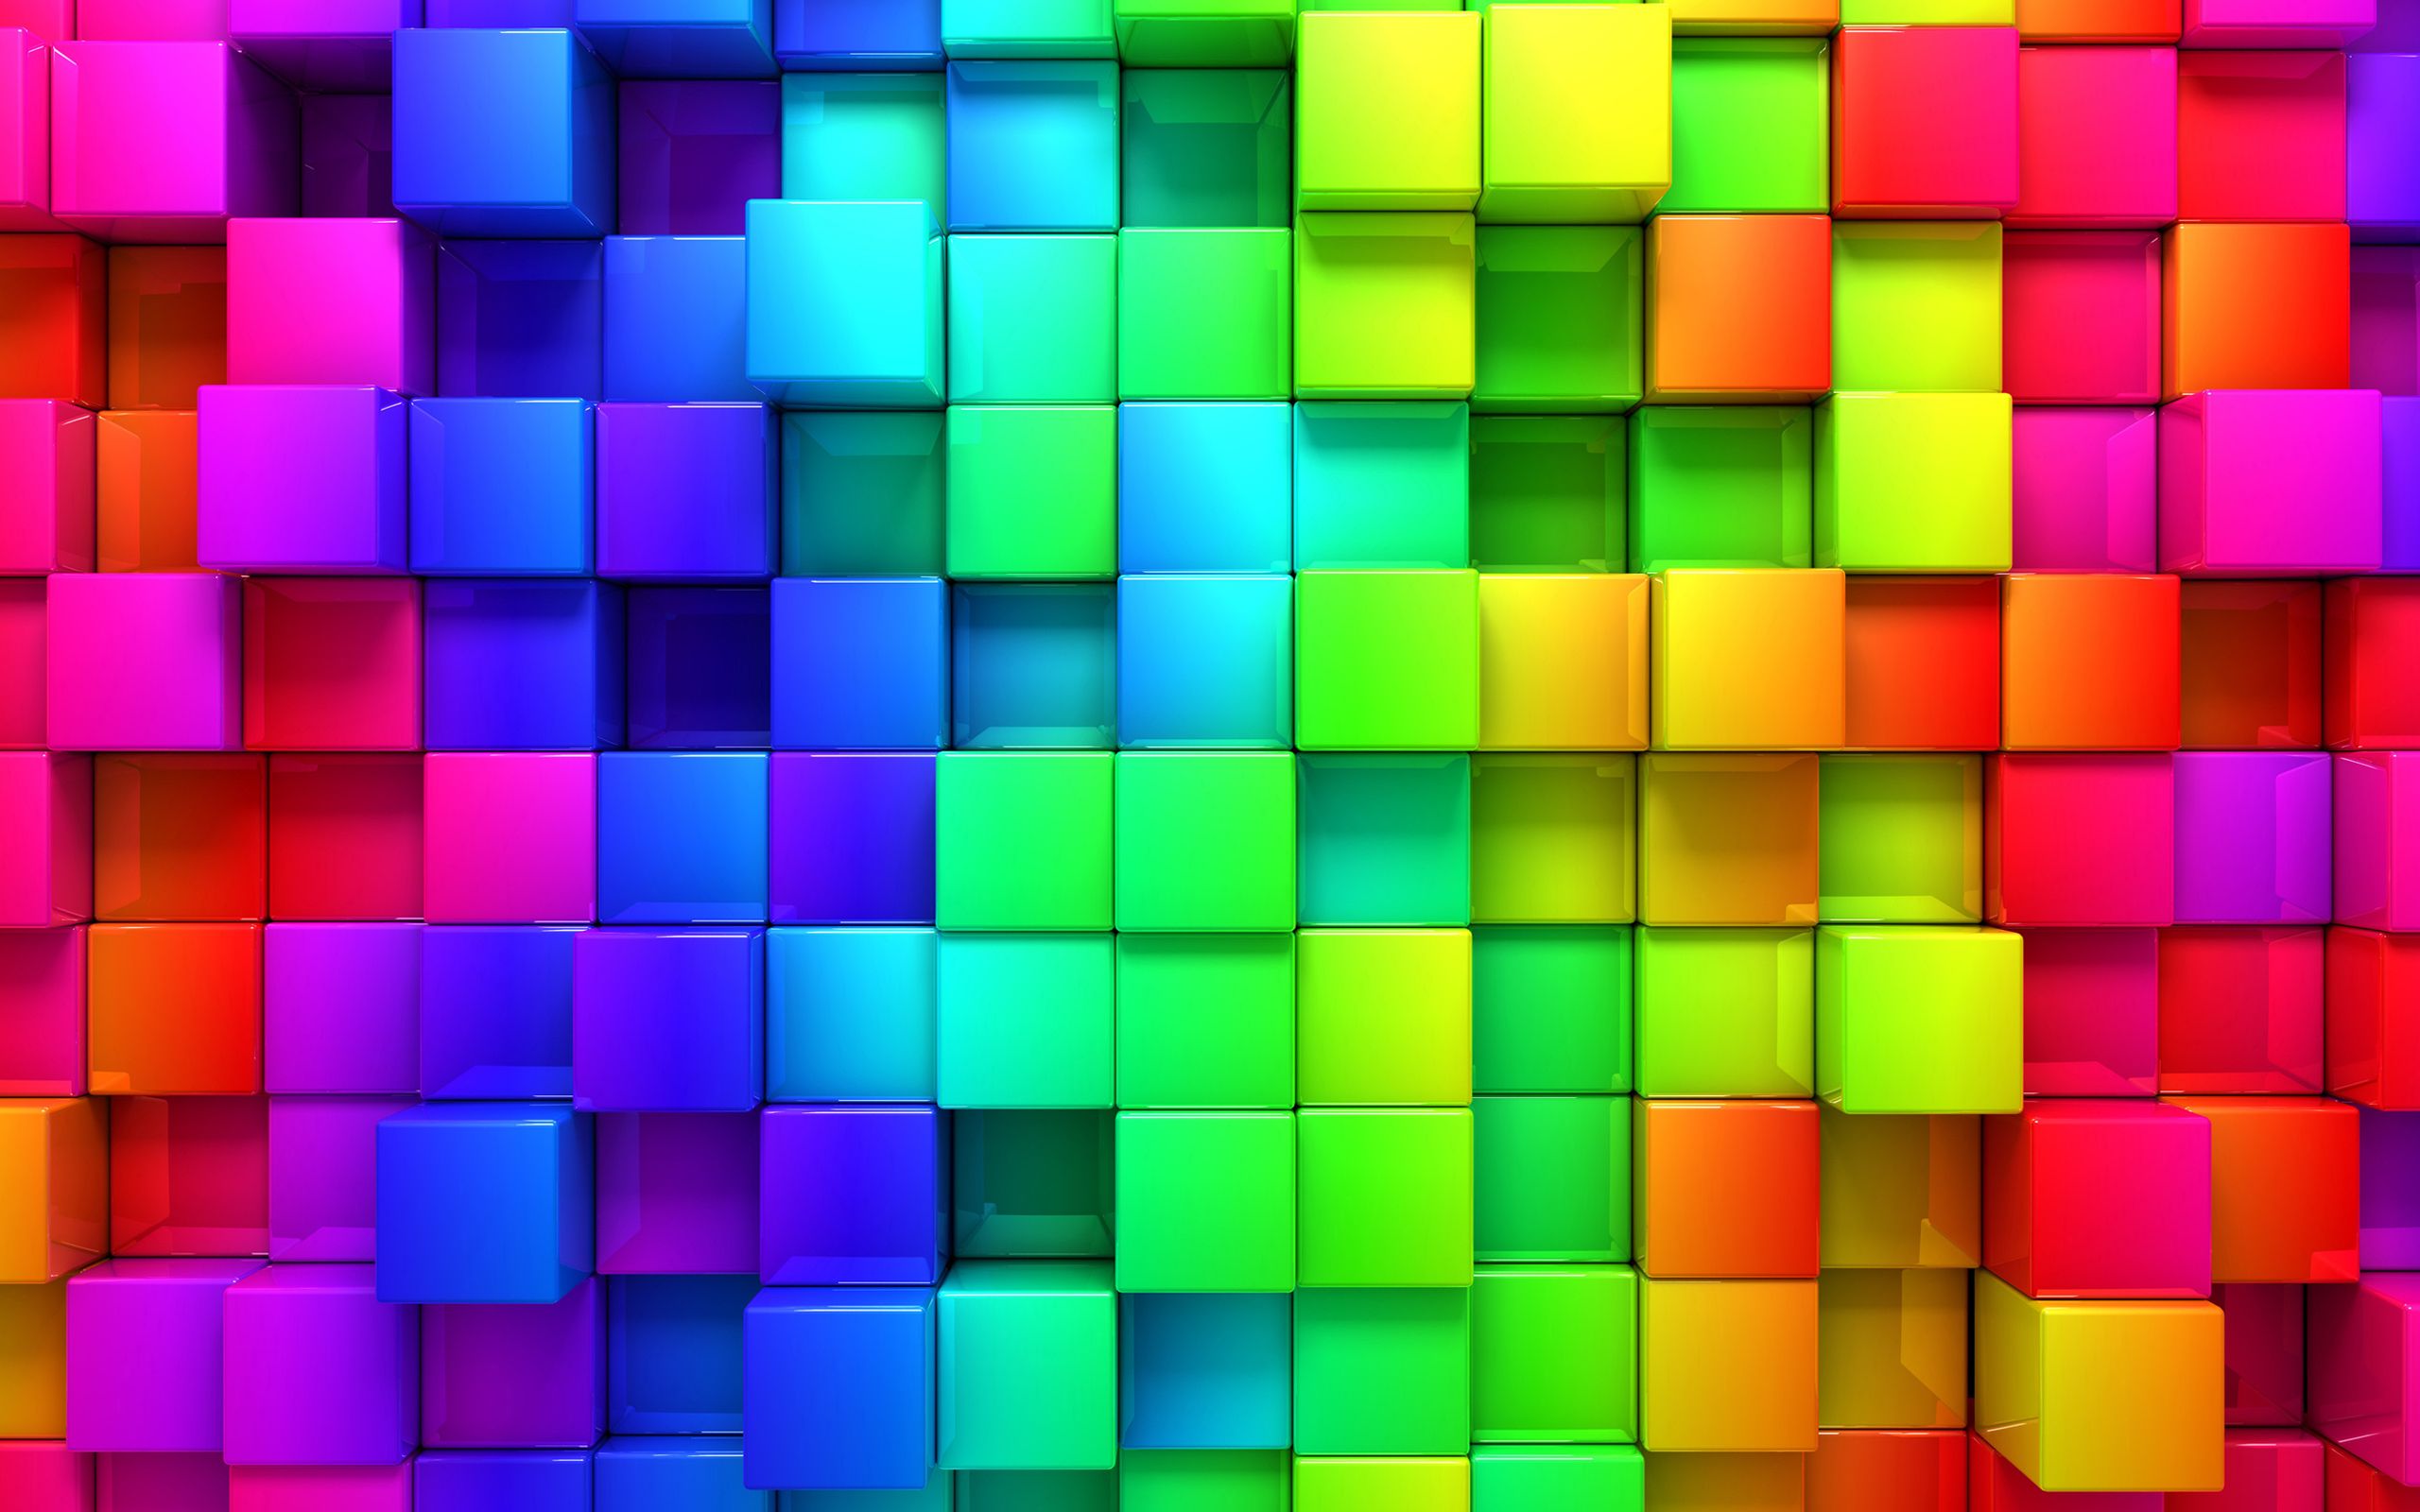 Samsung Galaxy Tab S wallpaper with Colorful 3D Cubes | HD ...